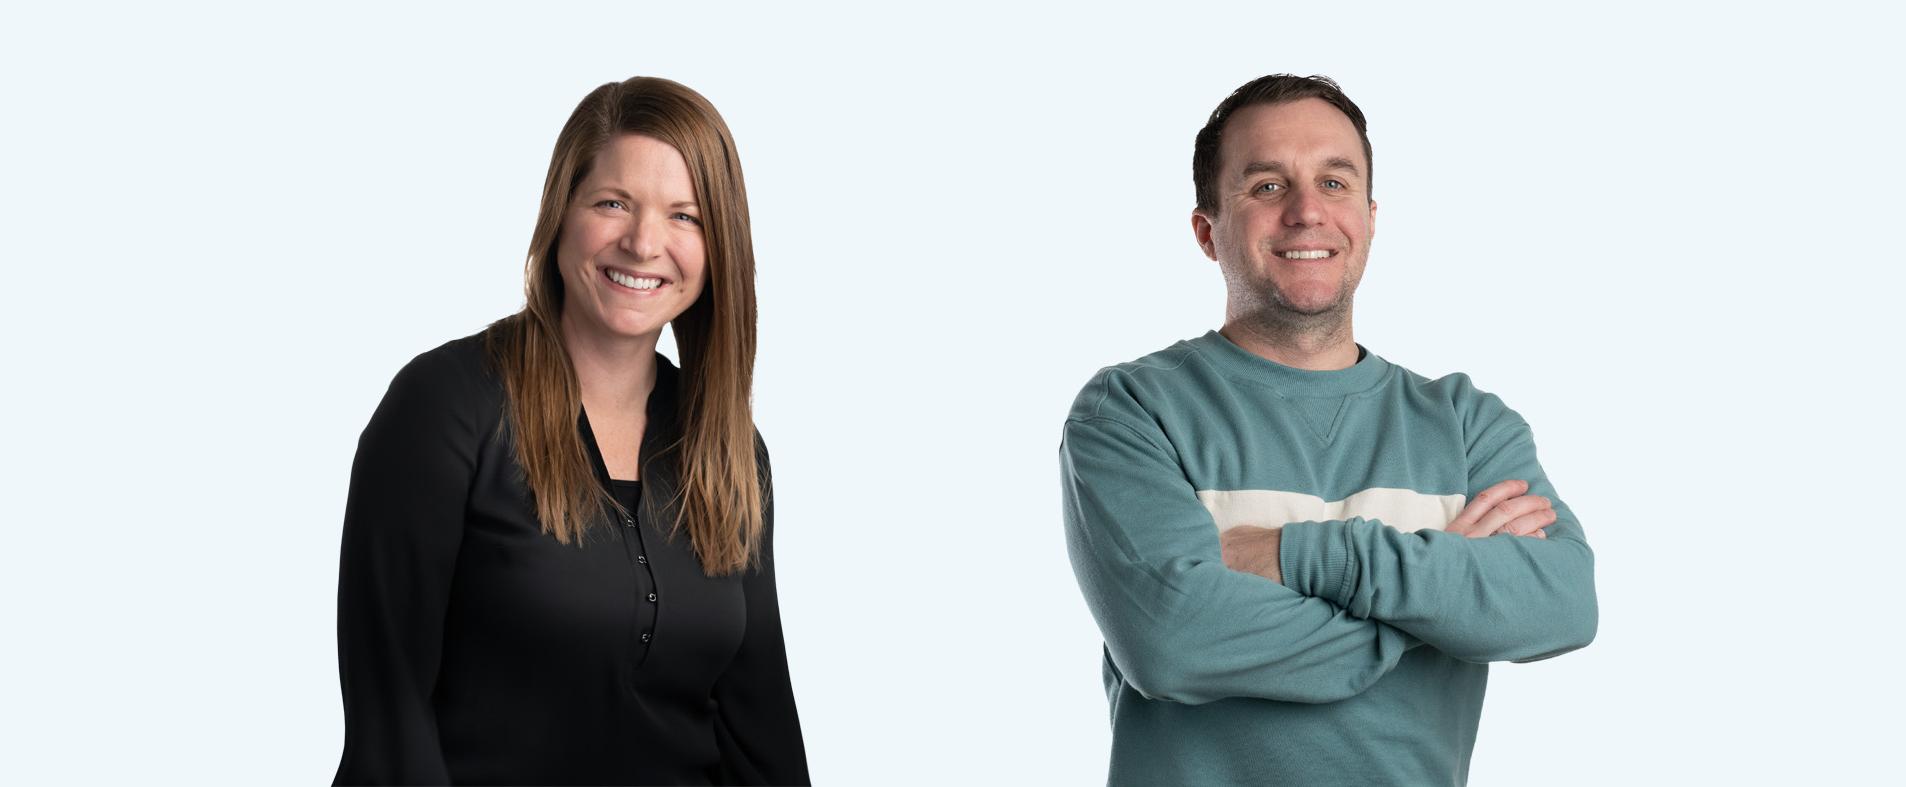 DKY Adds Art Director and Project Manager to Support Outdoor Business